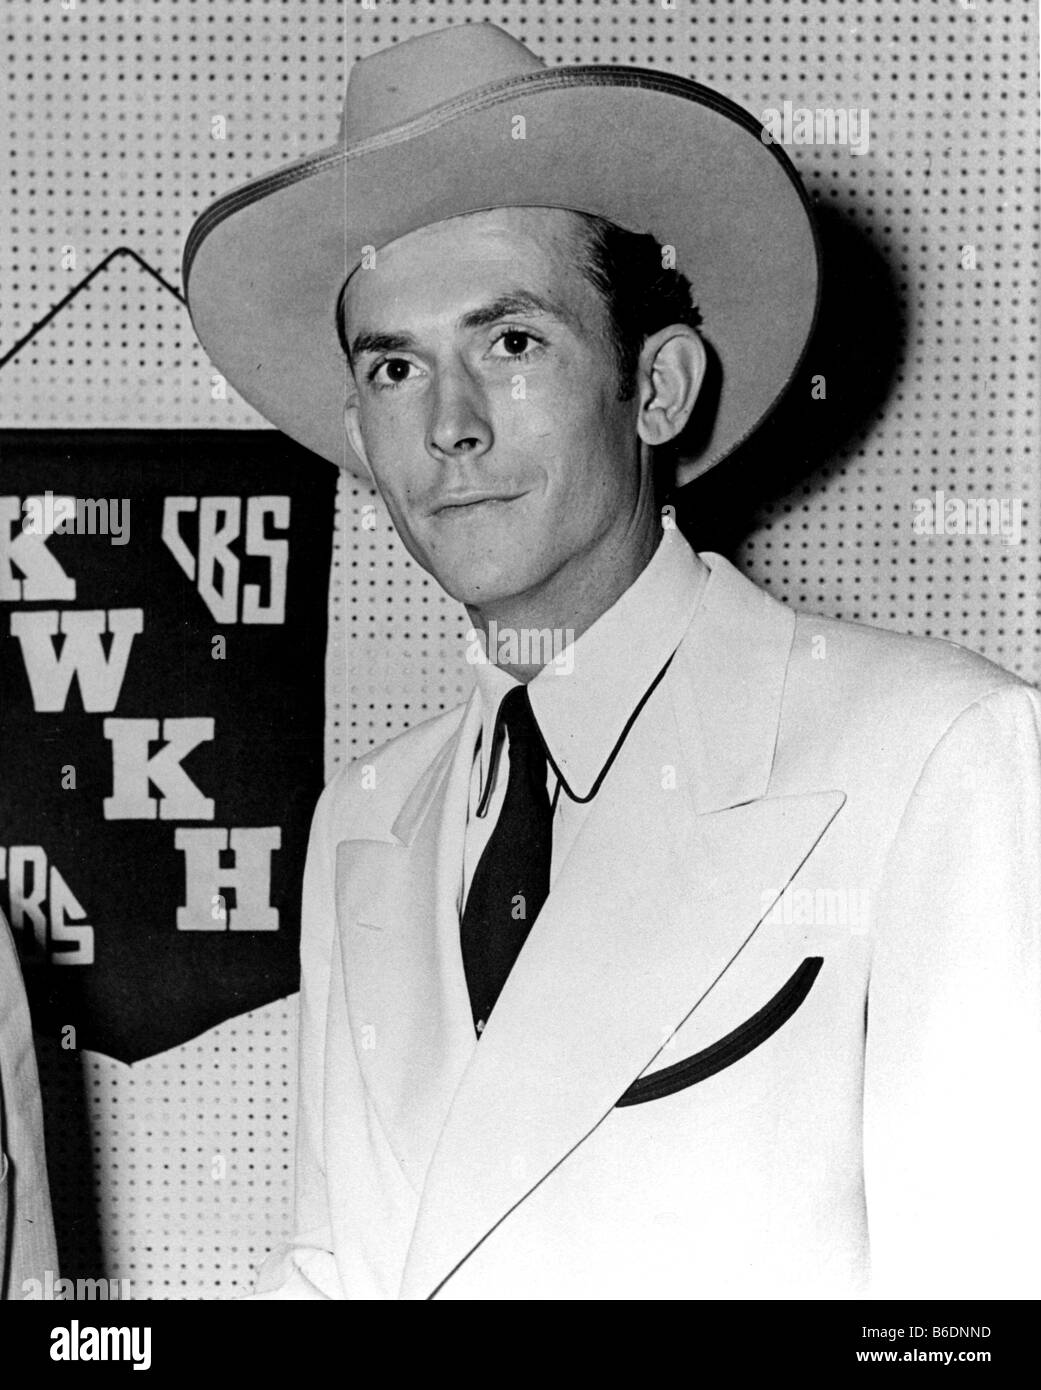 HANK WILLIAMS US Country and Western musician about 1952 Stock Photo